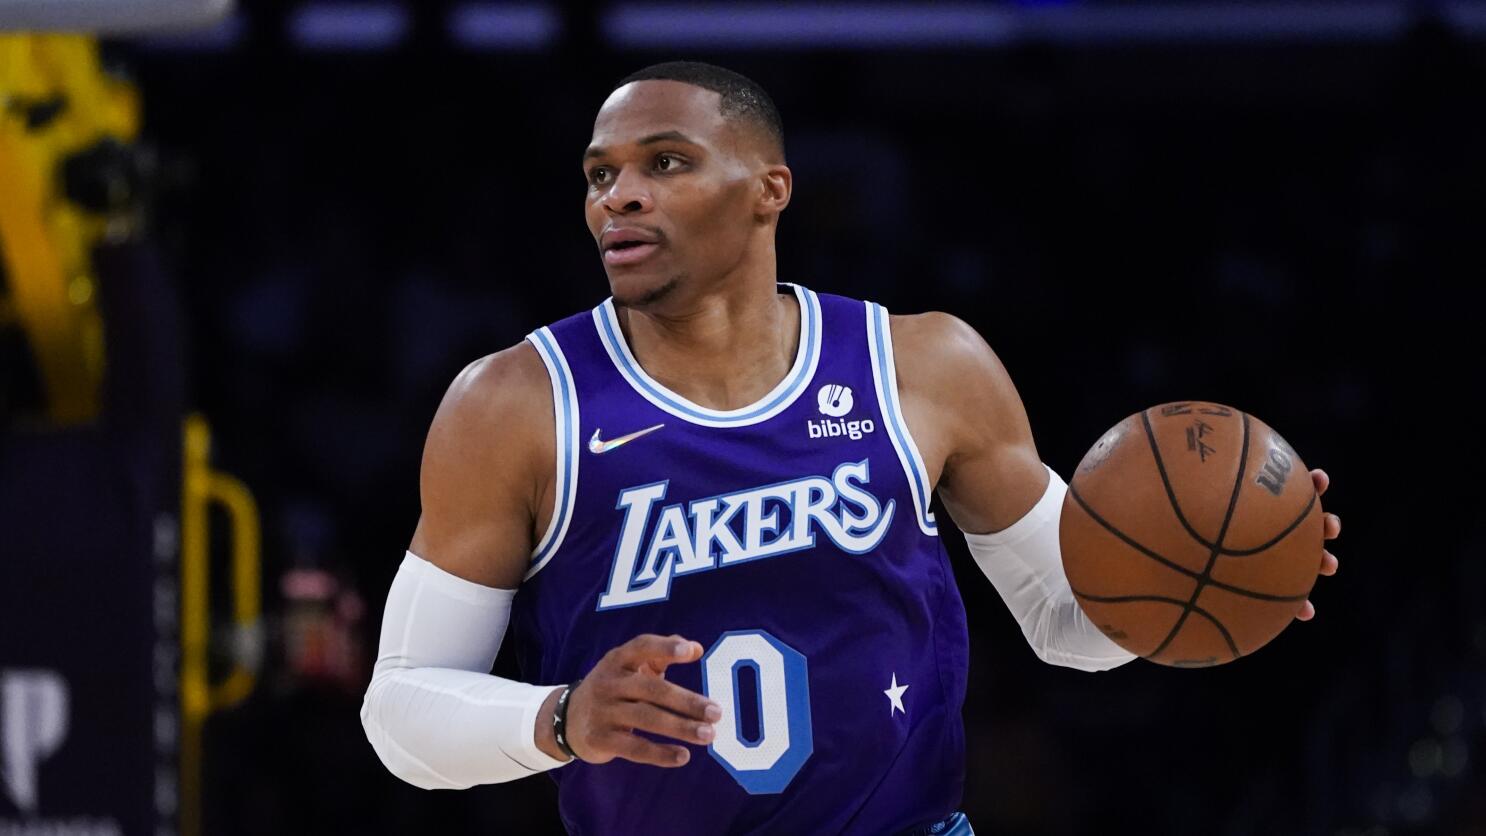 NBA insider provides Lakers fans hope about Russell Westbrook